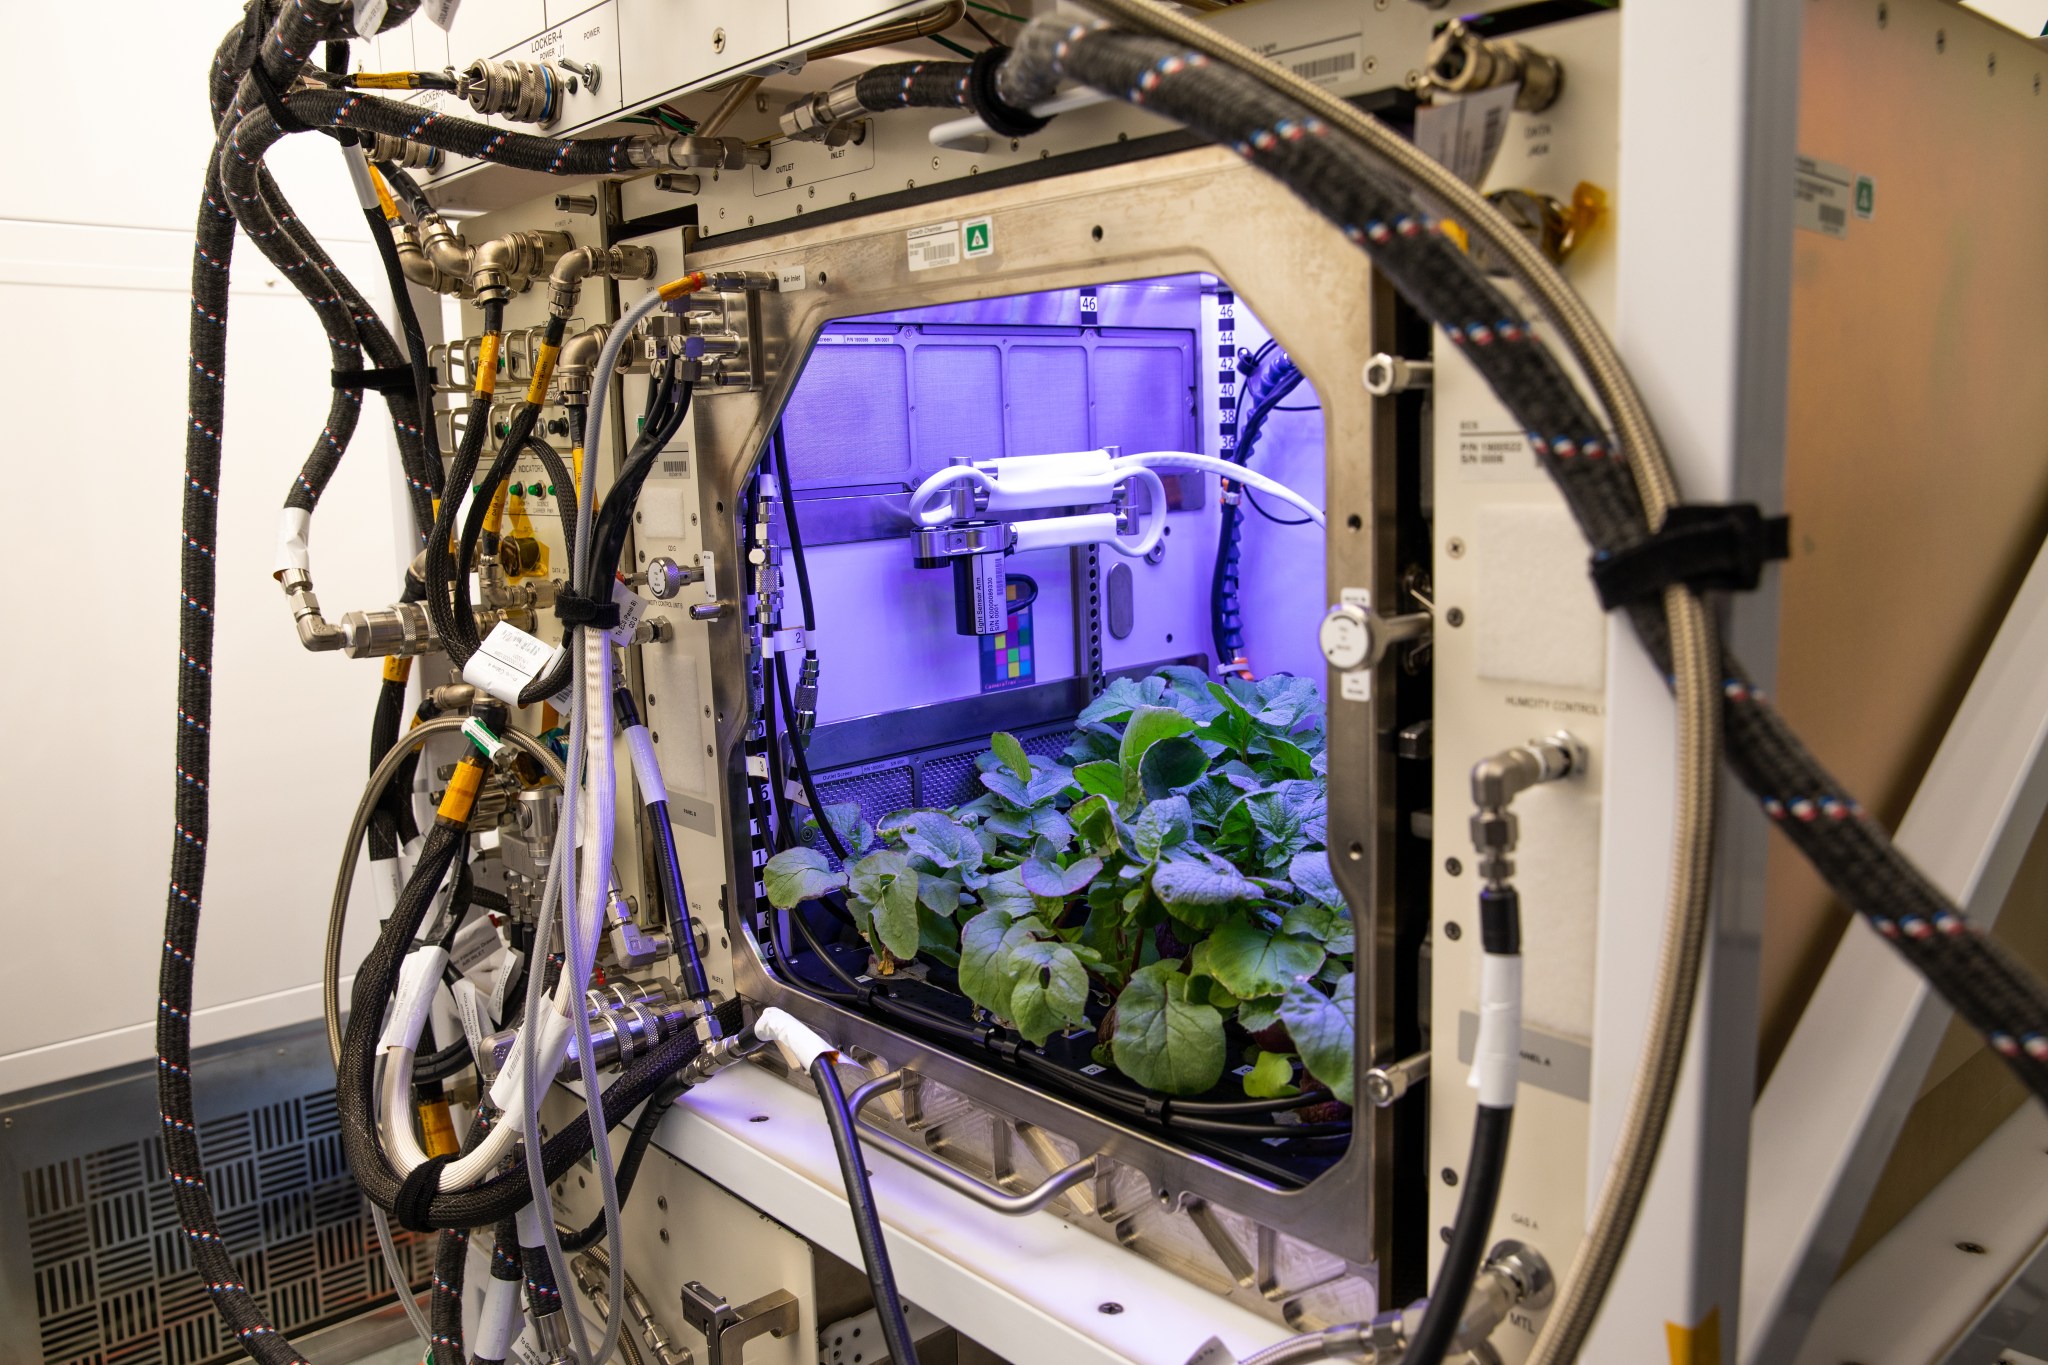 A view of radishes growing in the Advanced Plant Habitat (APH) ground unit at Kennedy Space Center in Florida.